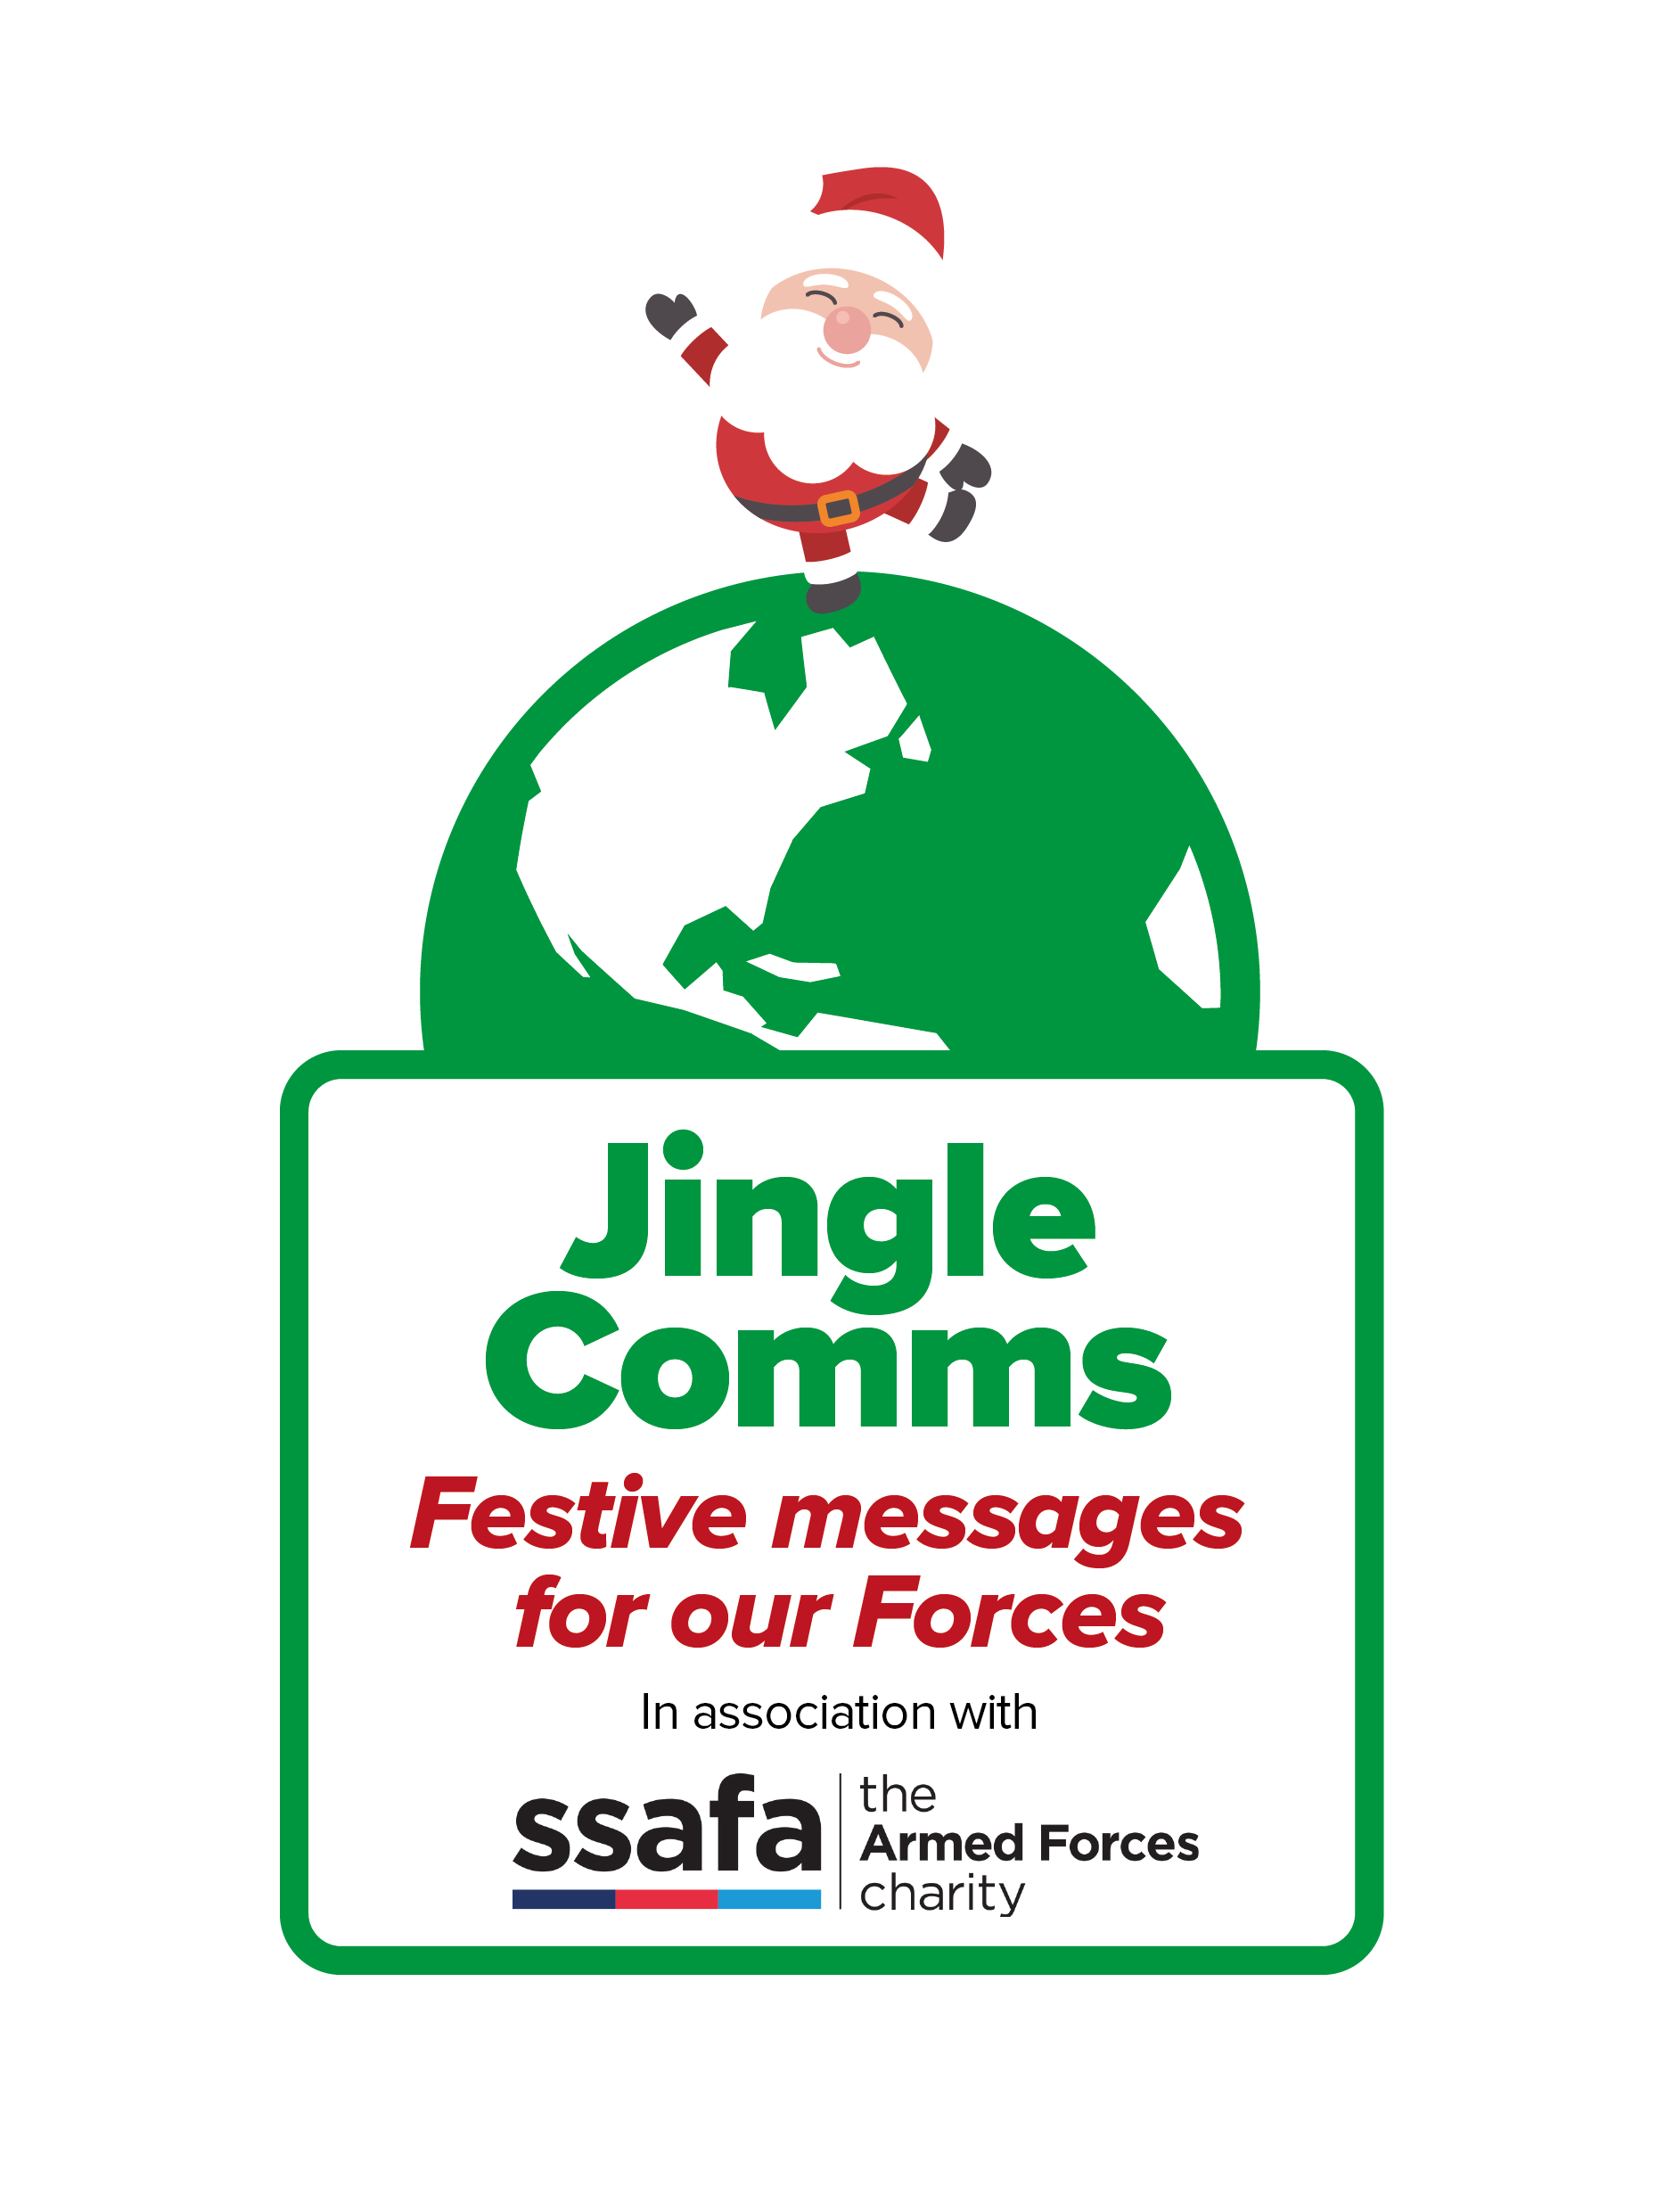 Pathfinder Magazine Wants Your Festive Military Messages For The Annual Jingle Comms Campaign In Association With SSAFA